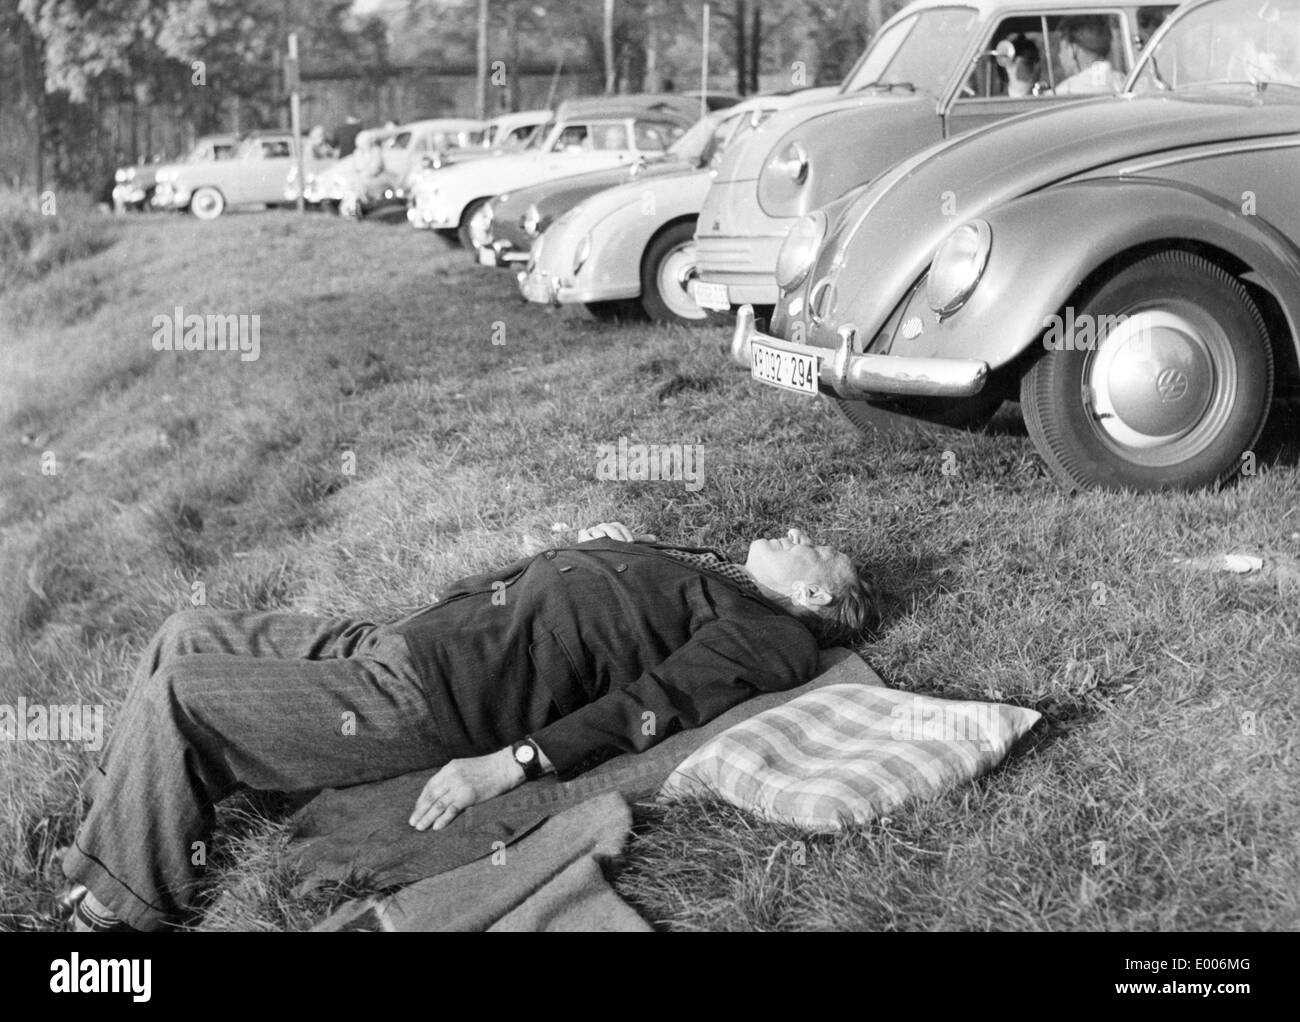 A recreation area in West Berlin, 50's Stock Photo